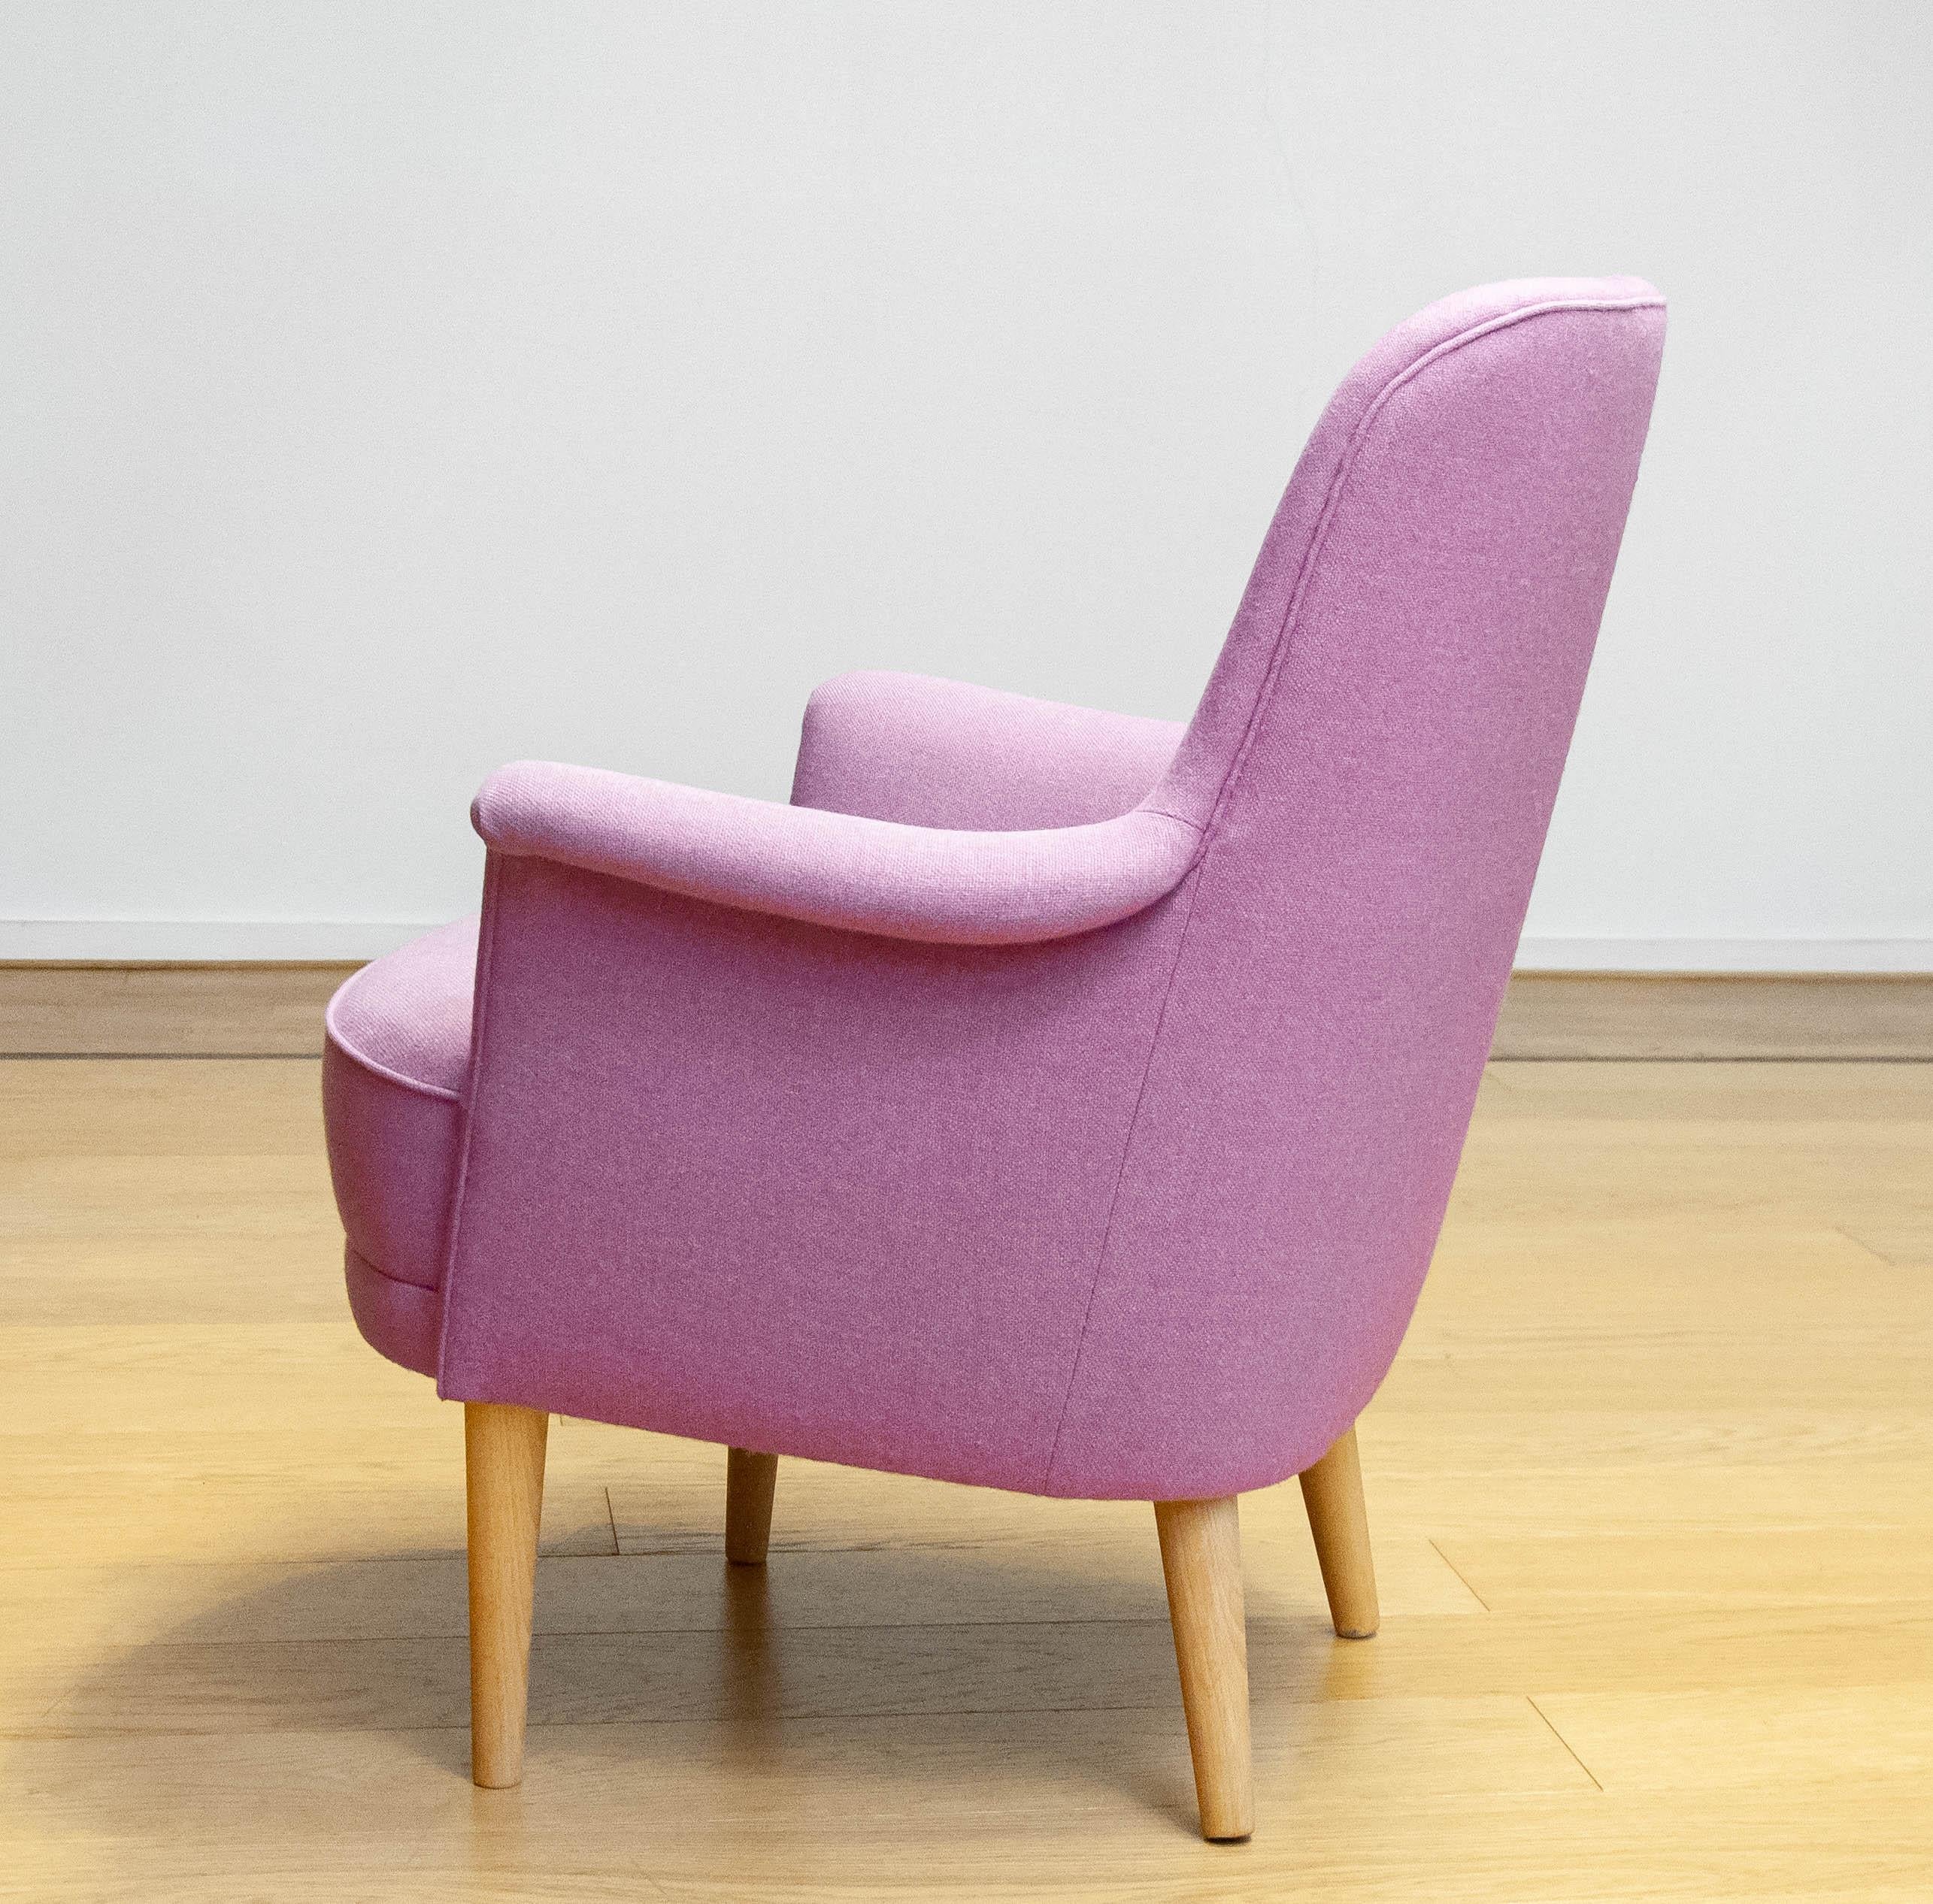 1950s Upholstered With Lilac Wool Armchair By Carl Malmsten For O.H. Sjogren. For Sale 1